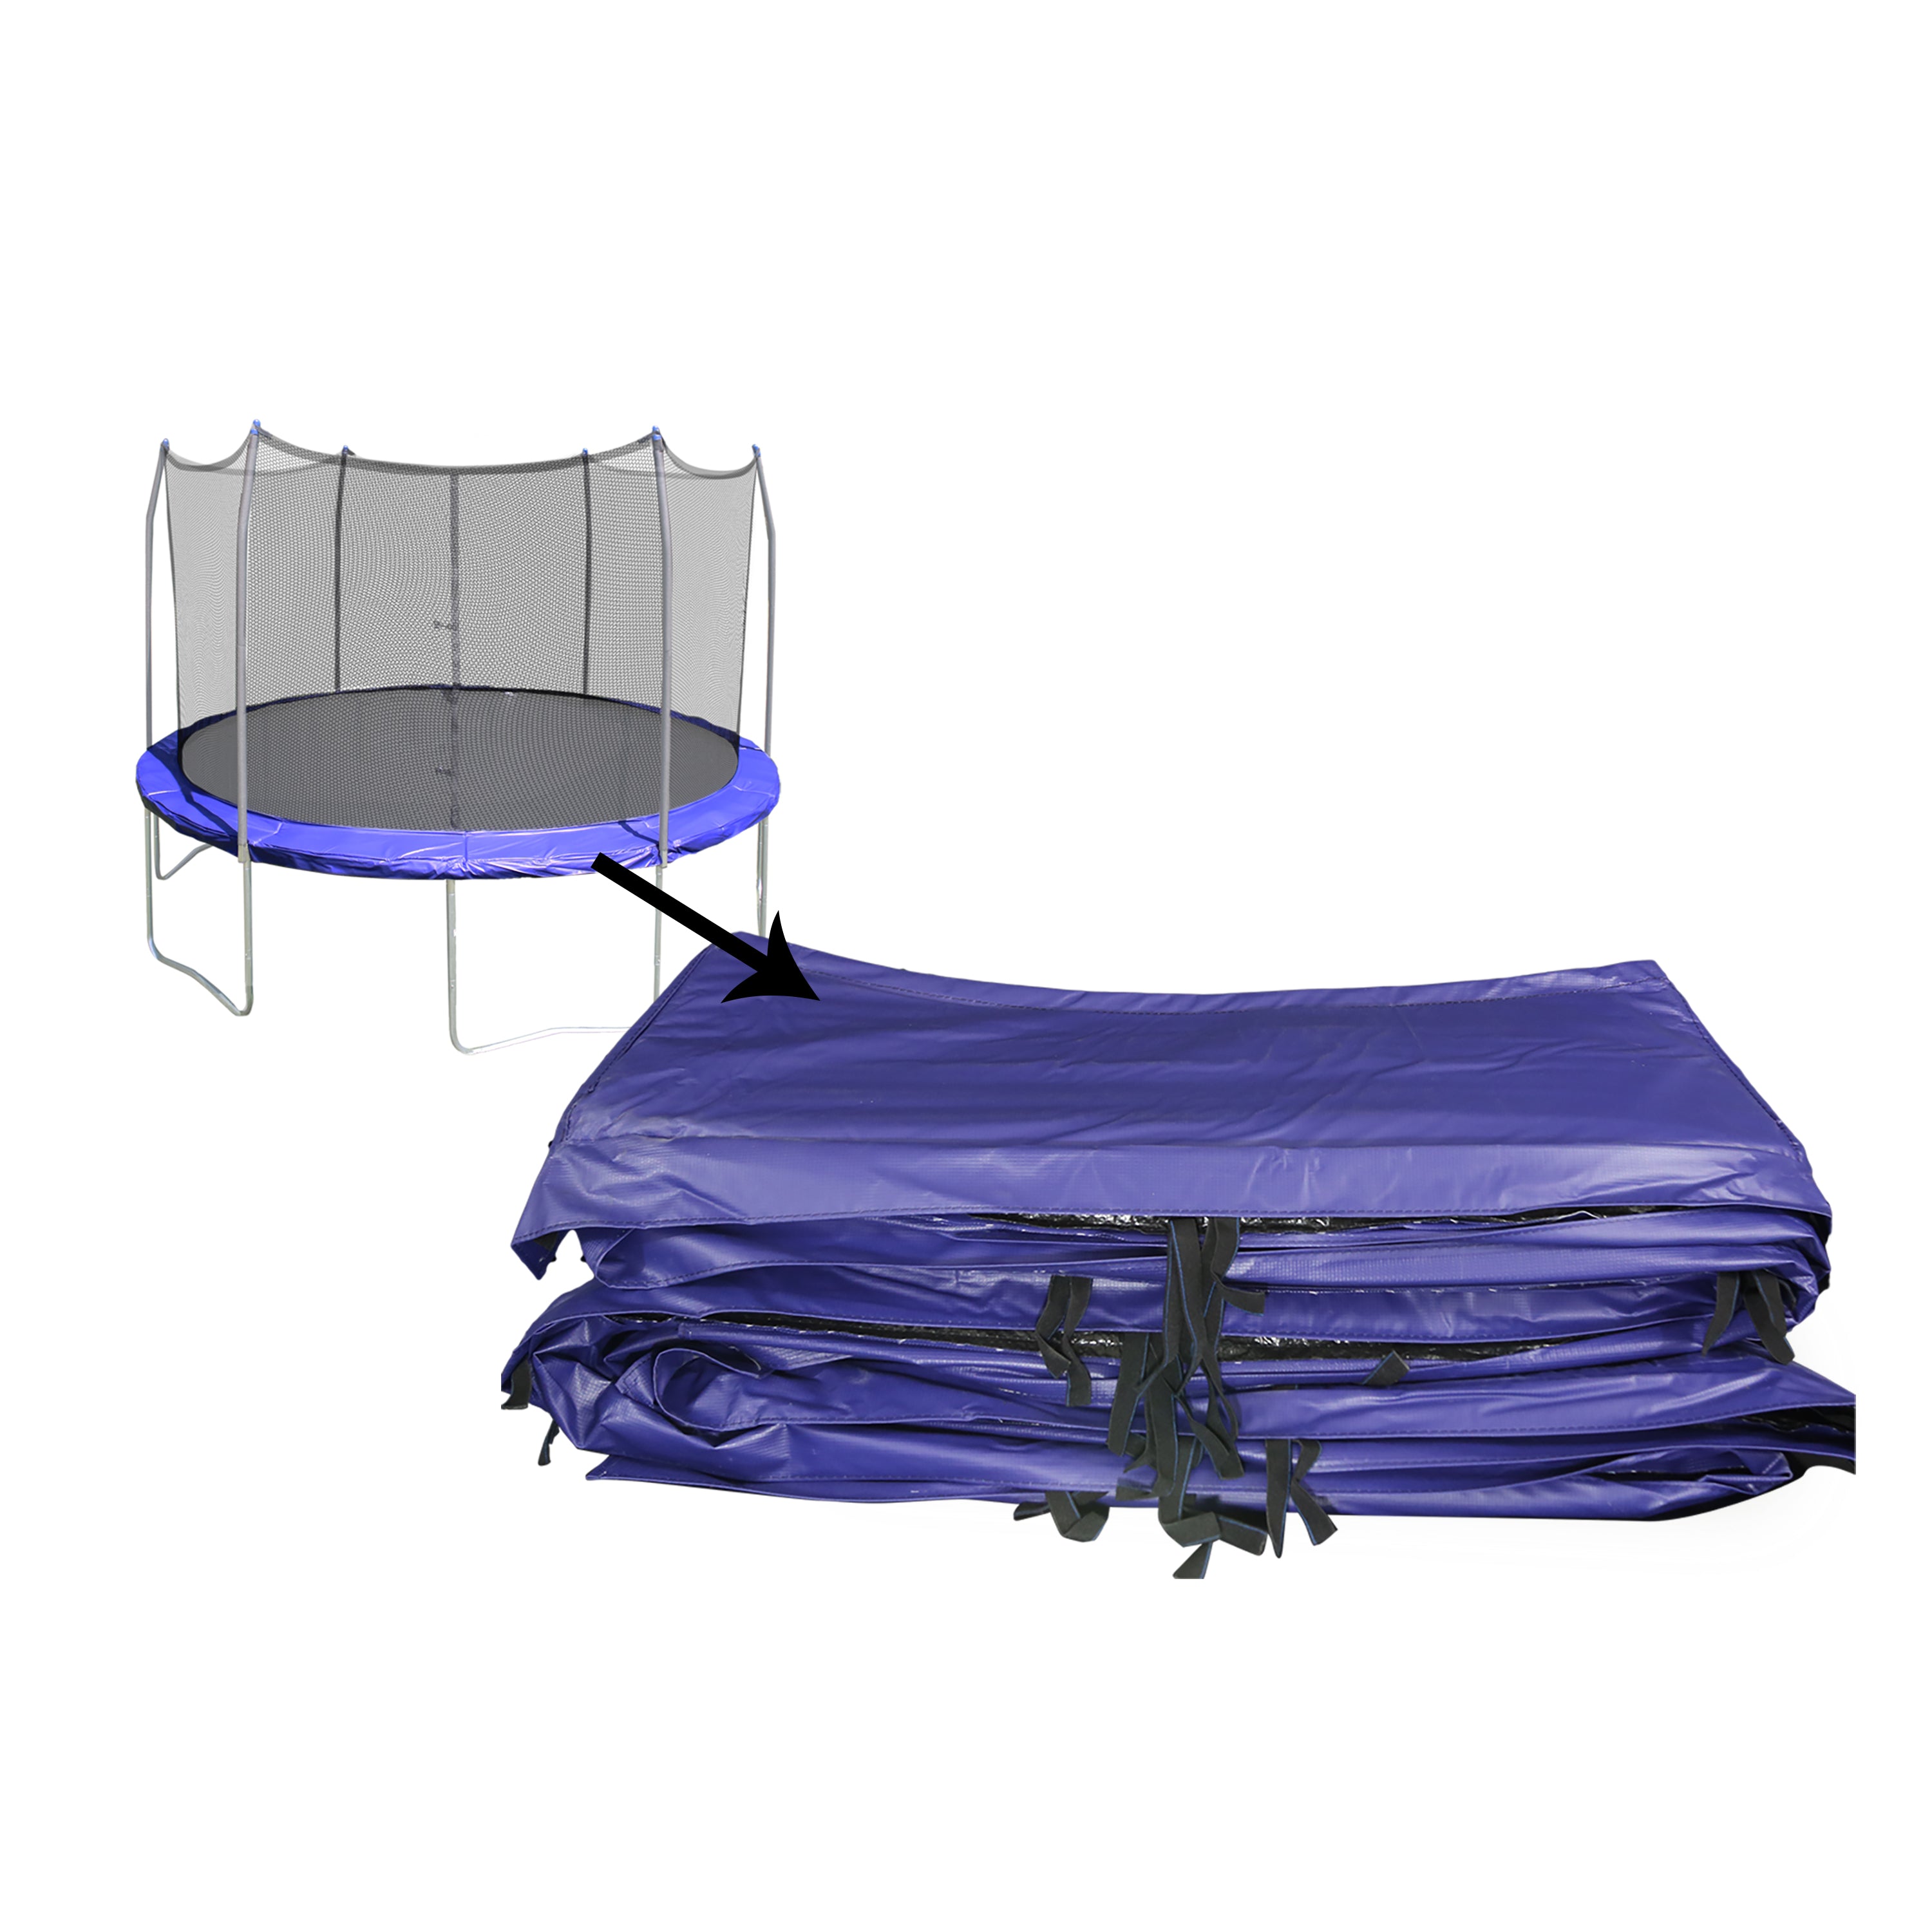 Blue spring pad designed for 16-foot round trampolines. 